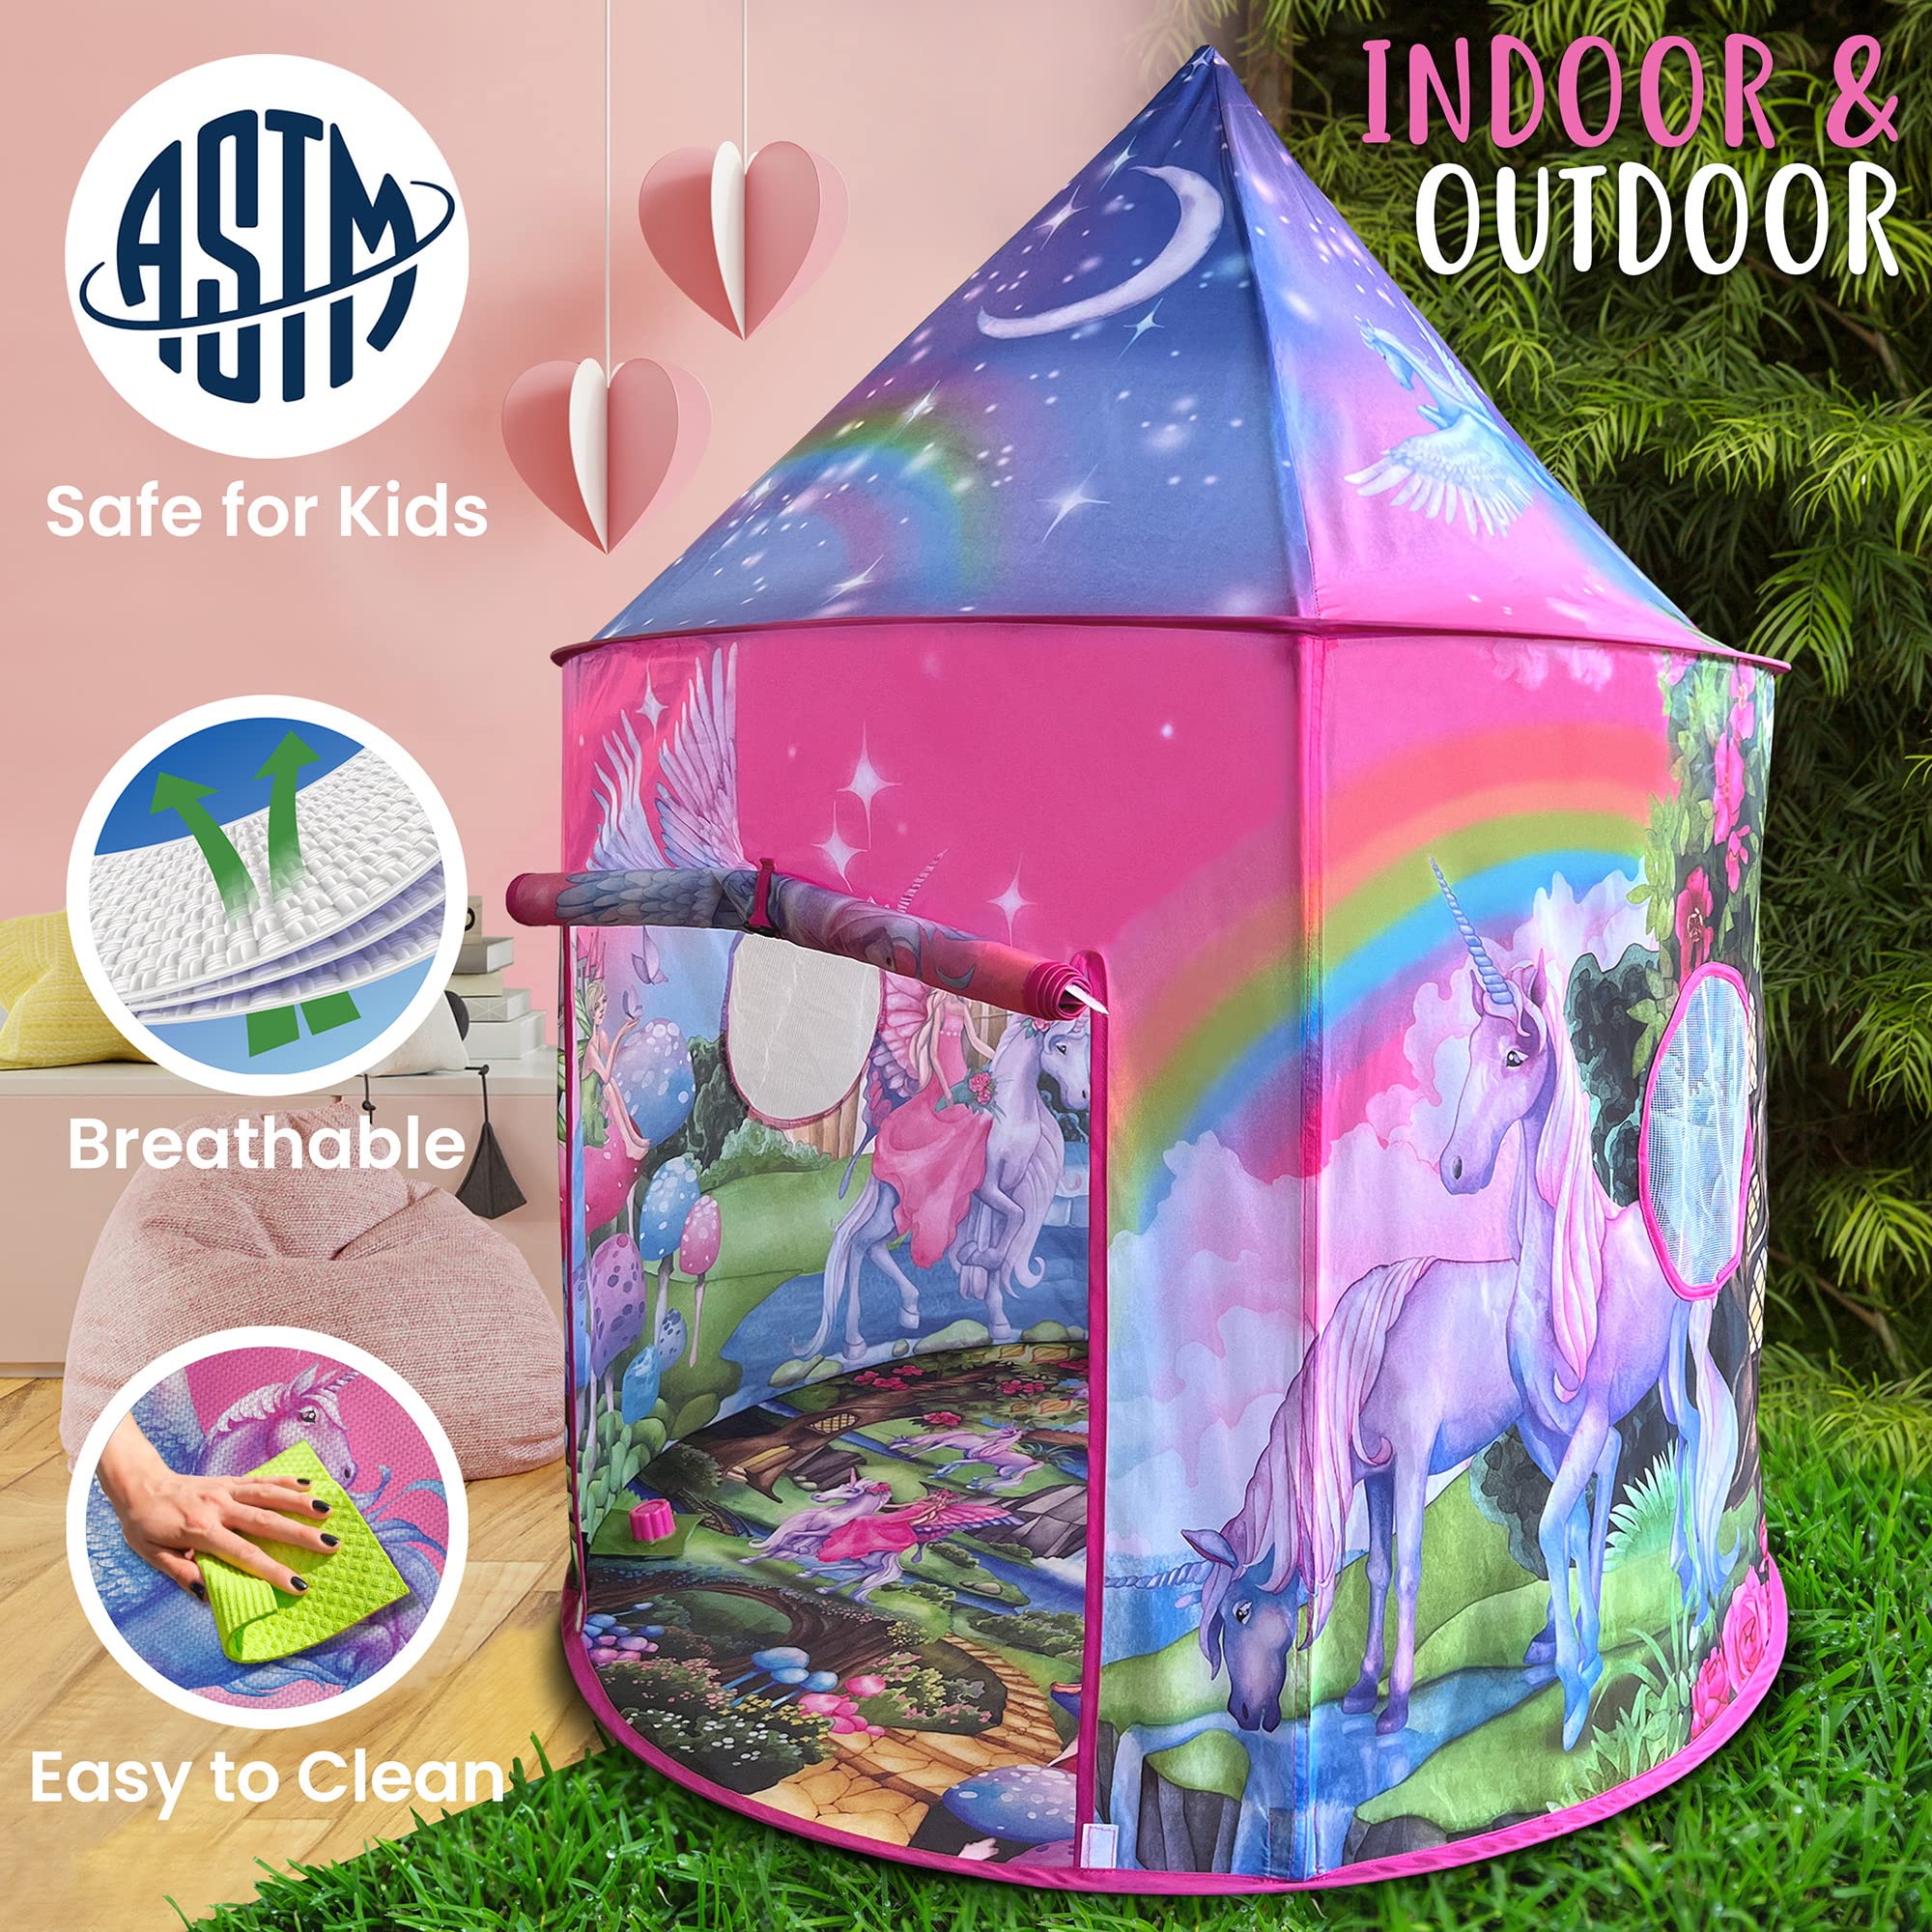 W&O Rainbow Unicorn Tent for Girls with Magical Unicorn Sounds, Unicorn Toys for Girls, Princess Tent for Girls, Unicorns Gifts for Girls, Outdoor & Indoor Tent, Play Tents for Girls